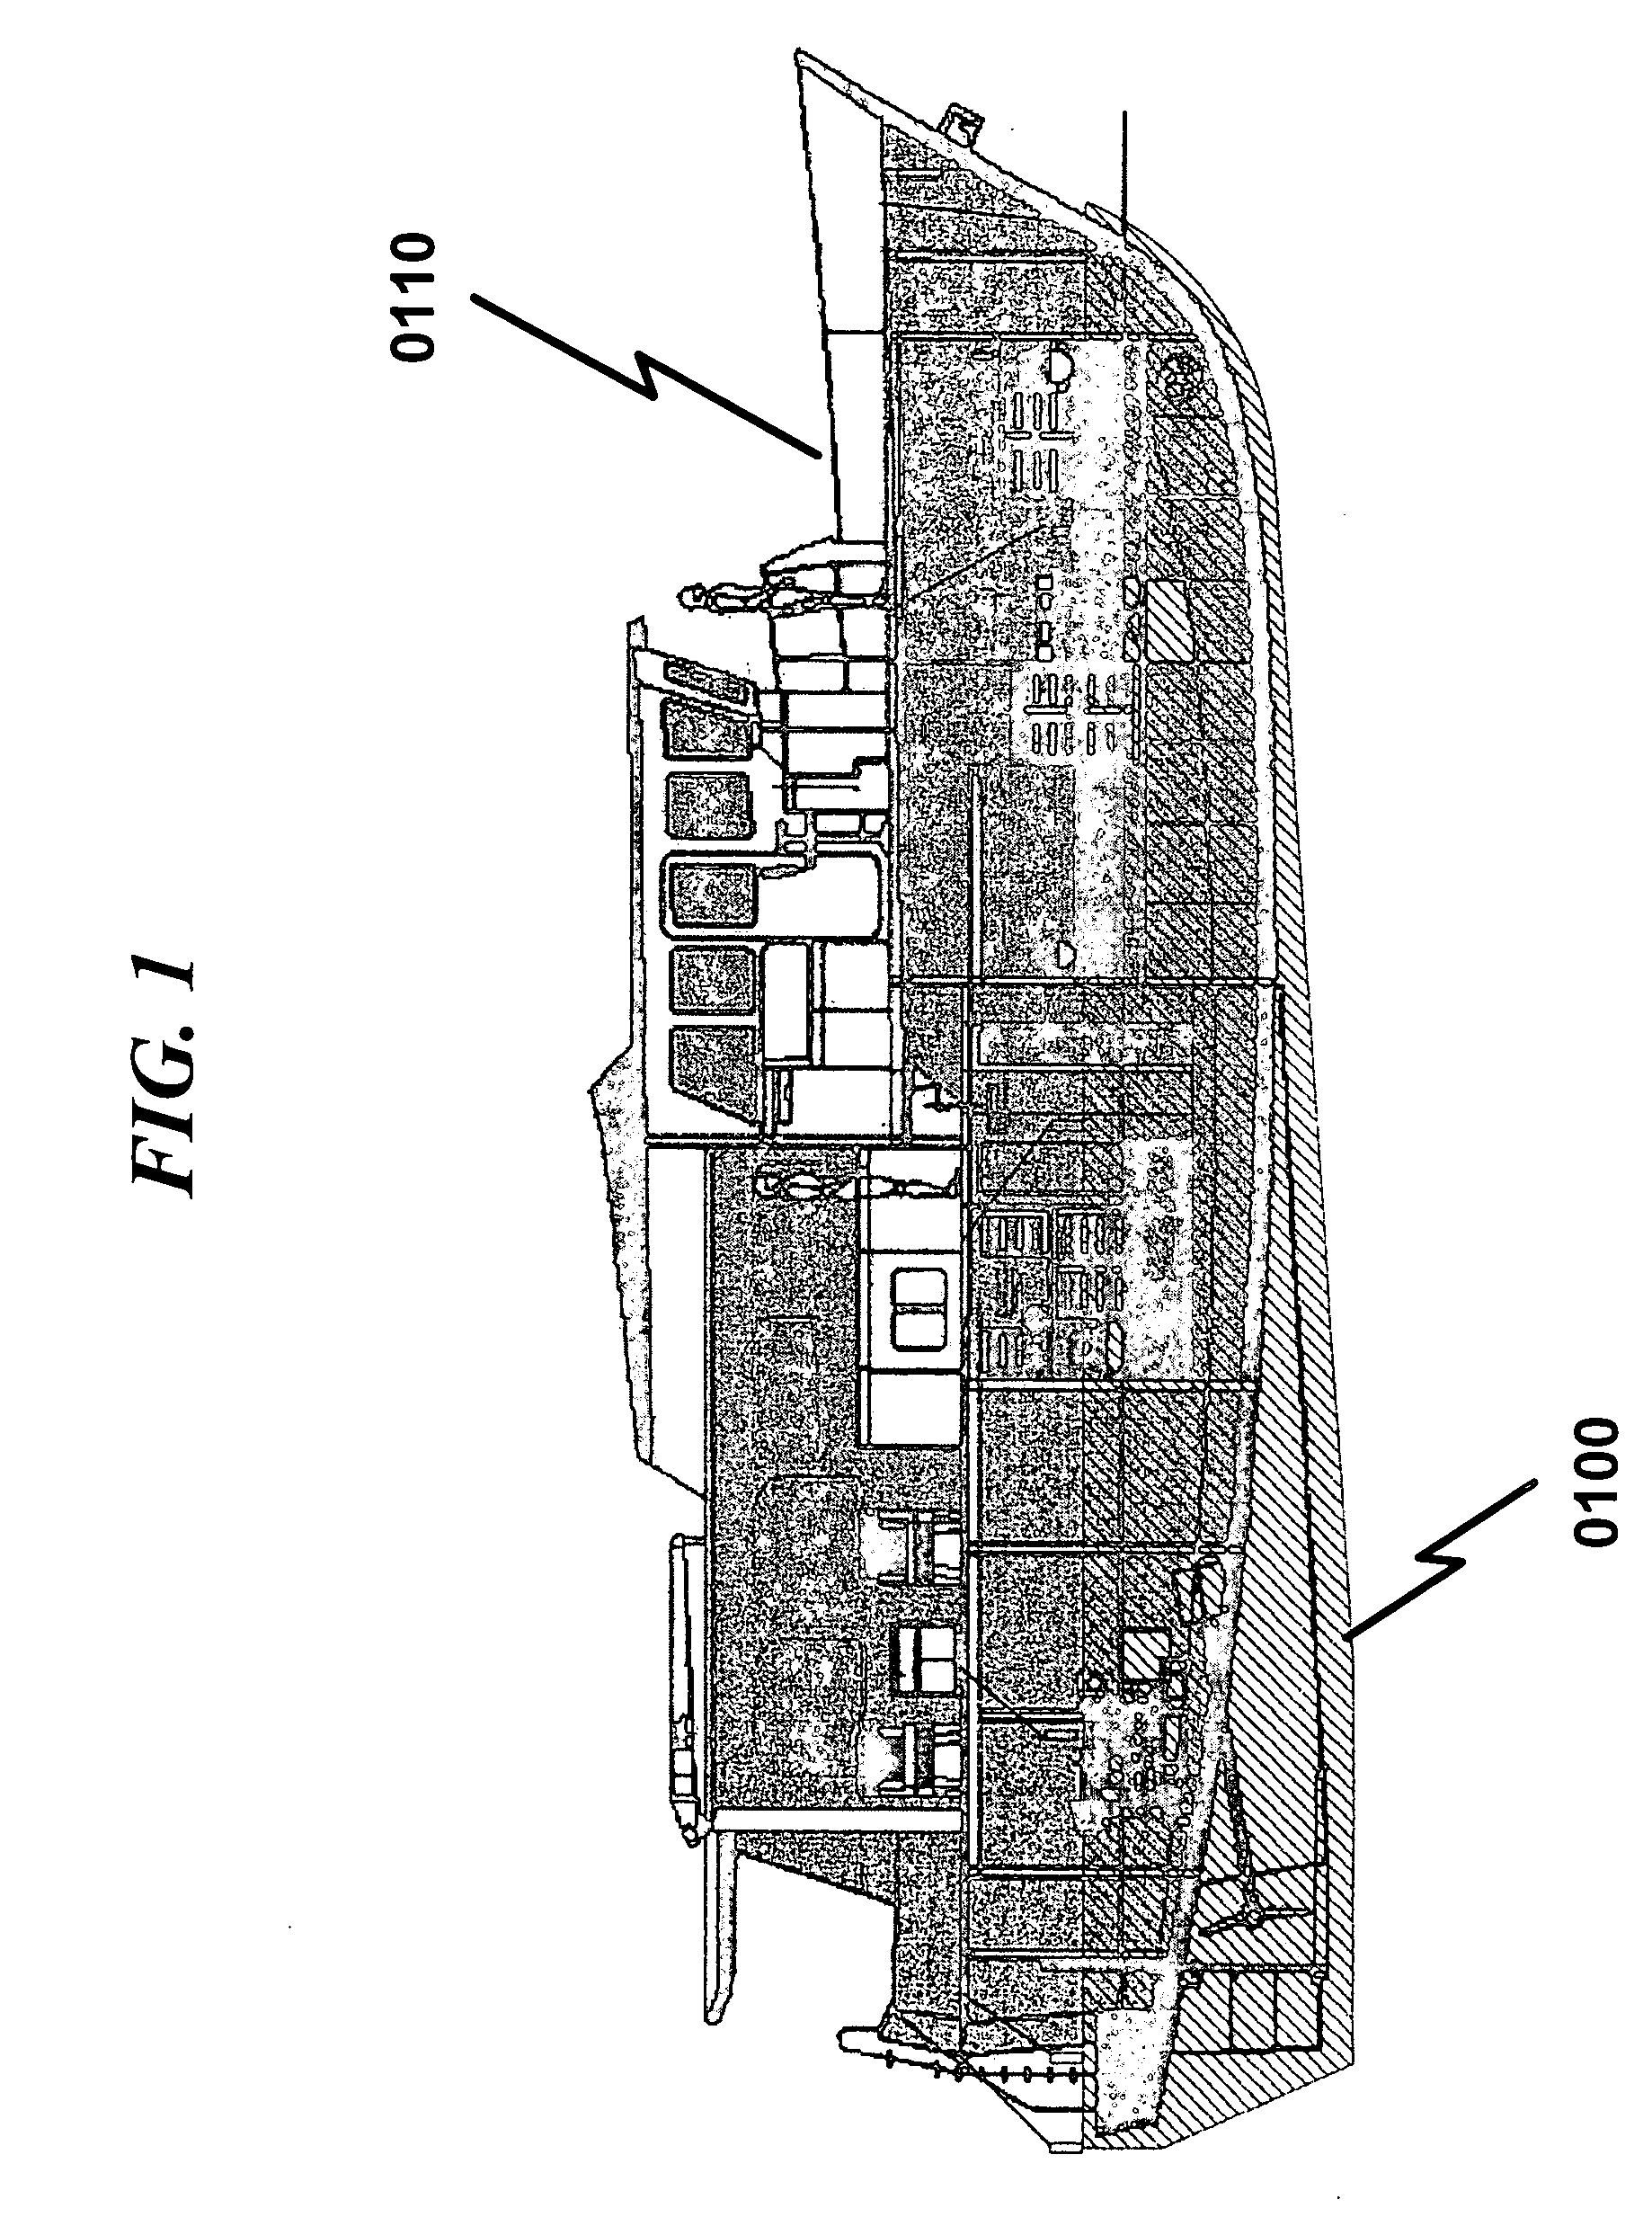 Crustacean barrier system and method